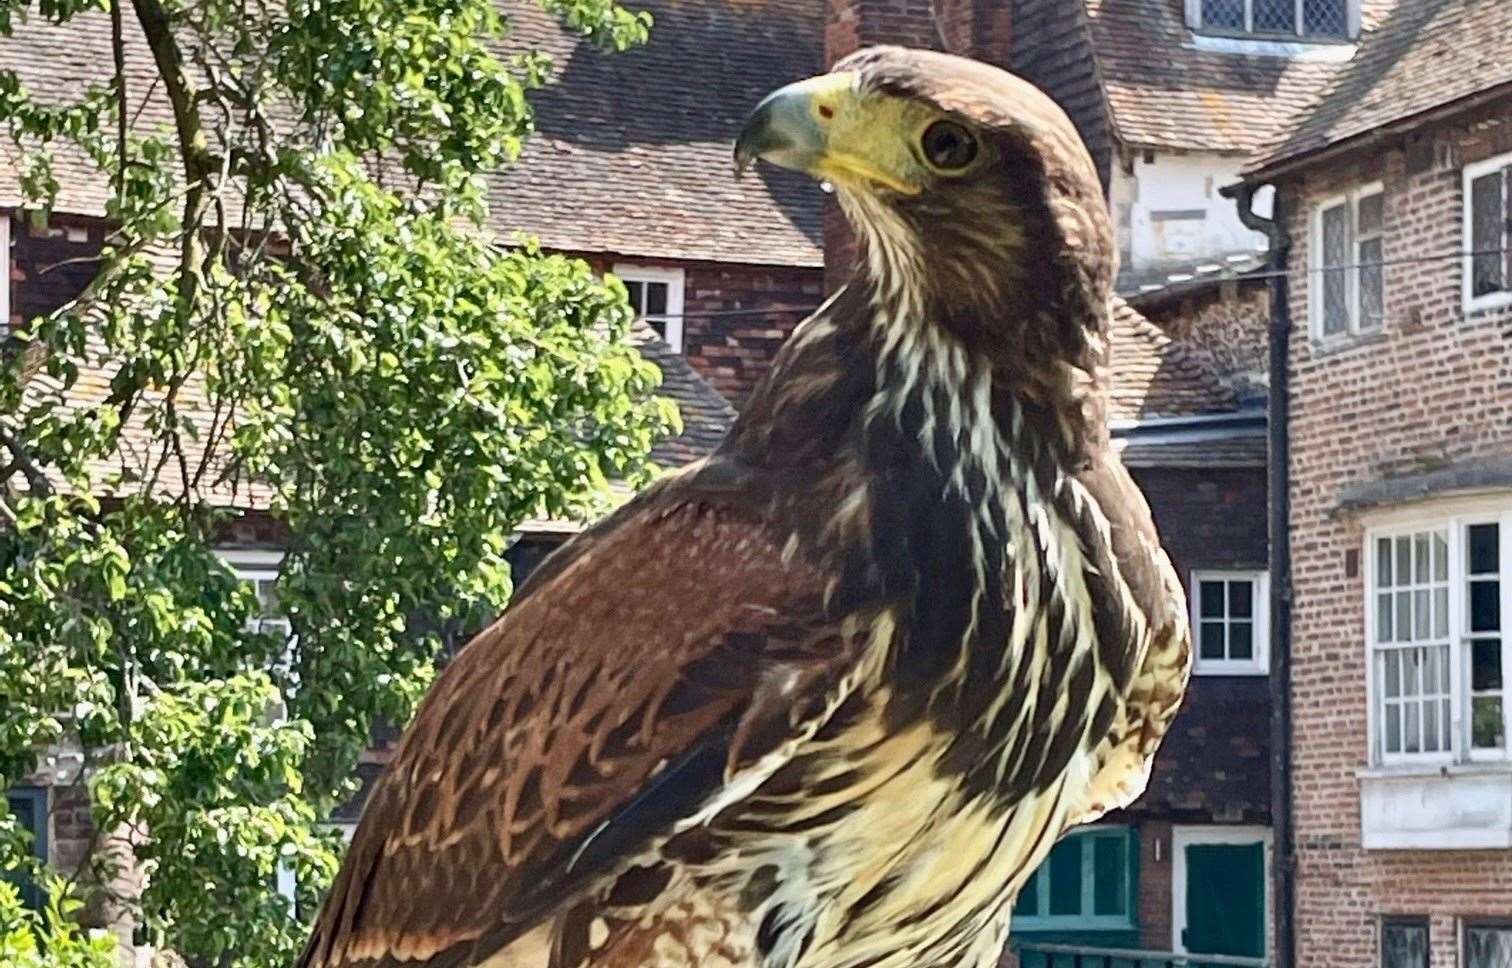 Ashford Borough Council had planned to introduce a hawk to the town centre but has now dropped the plans